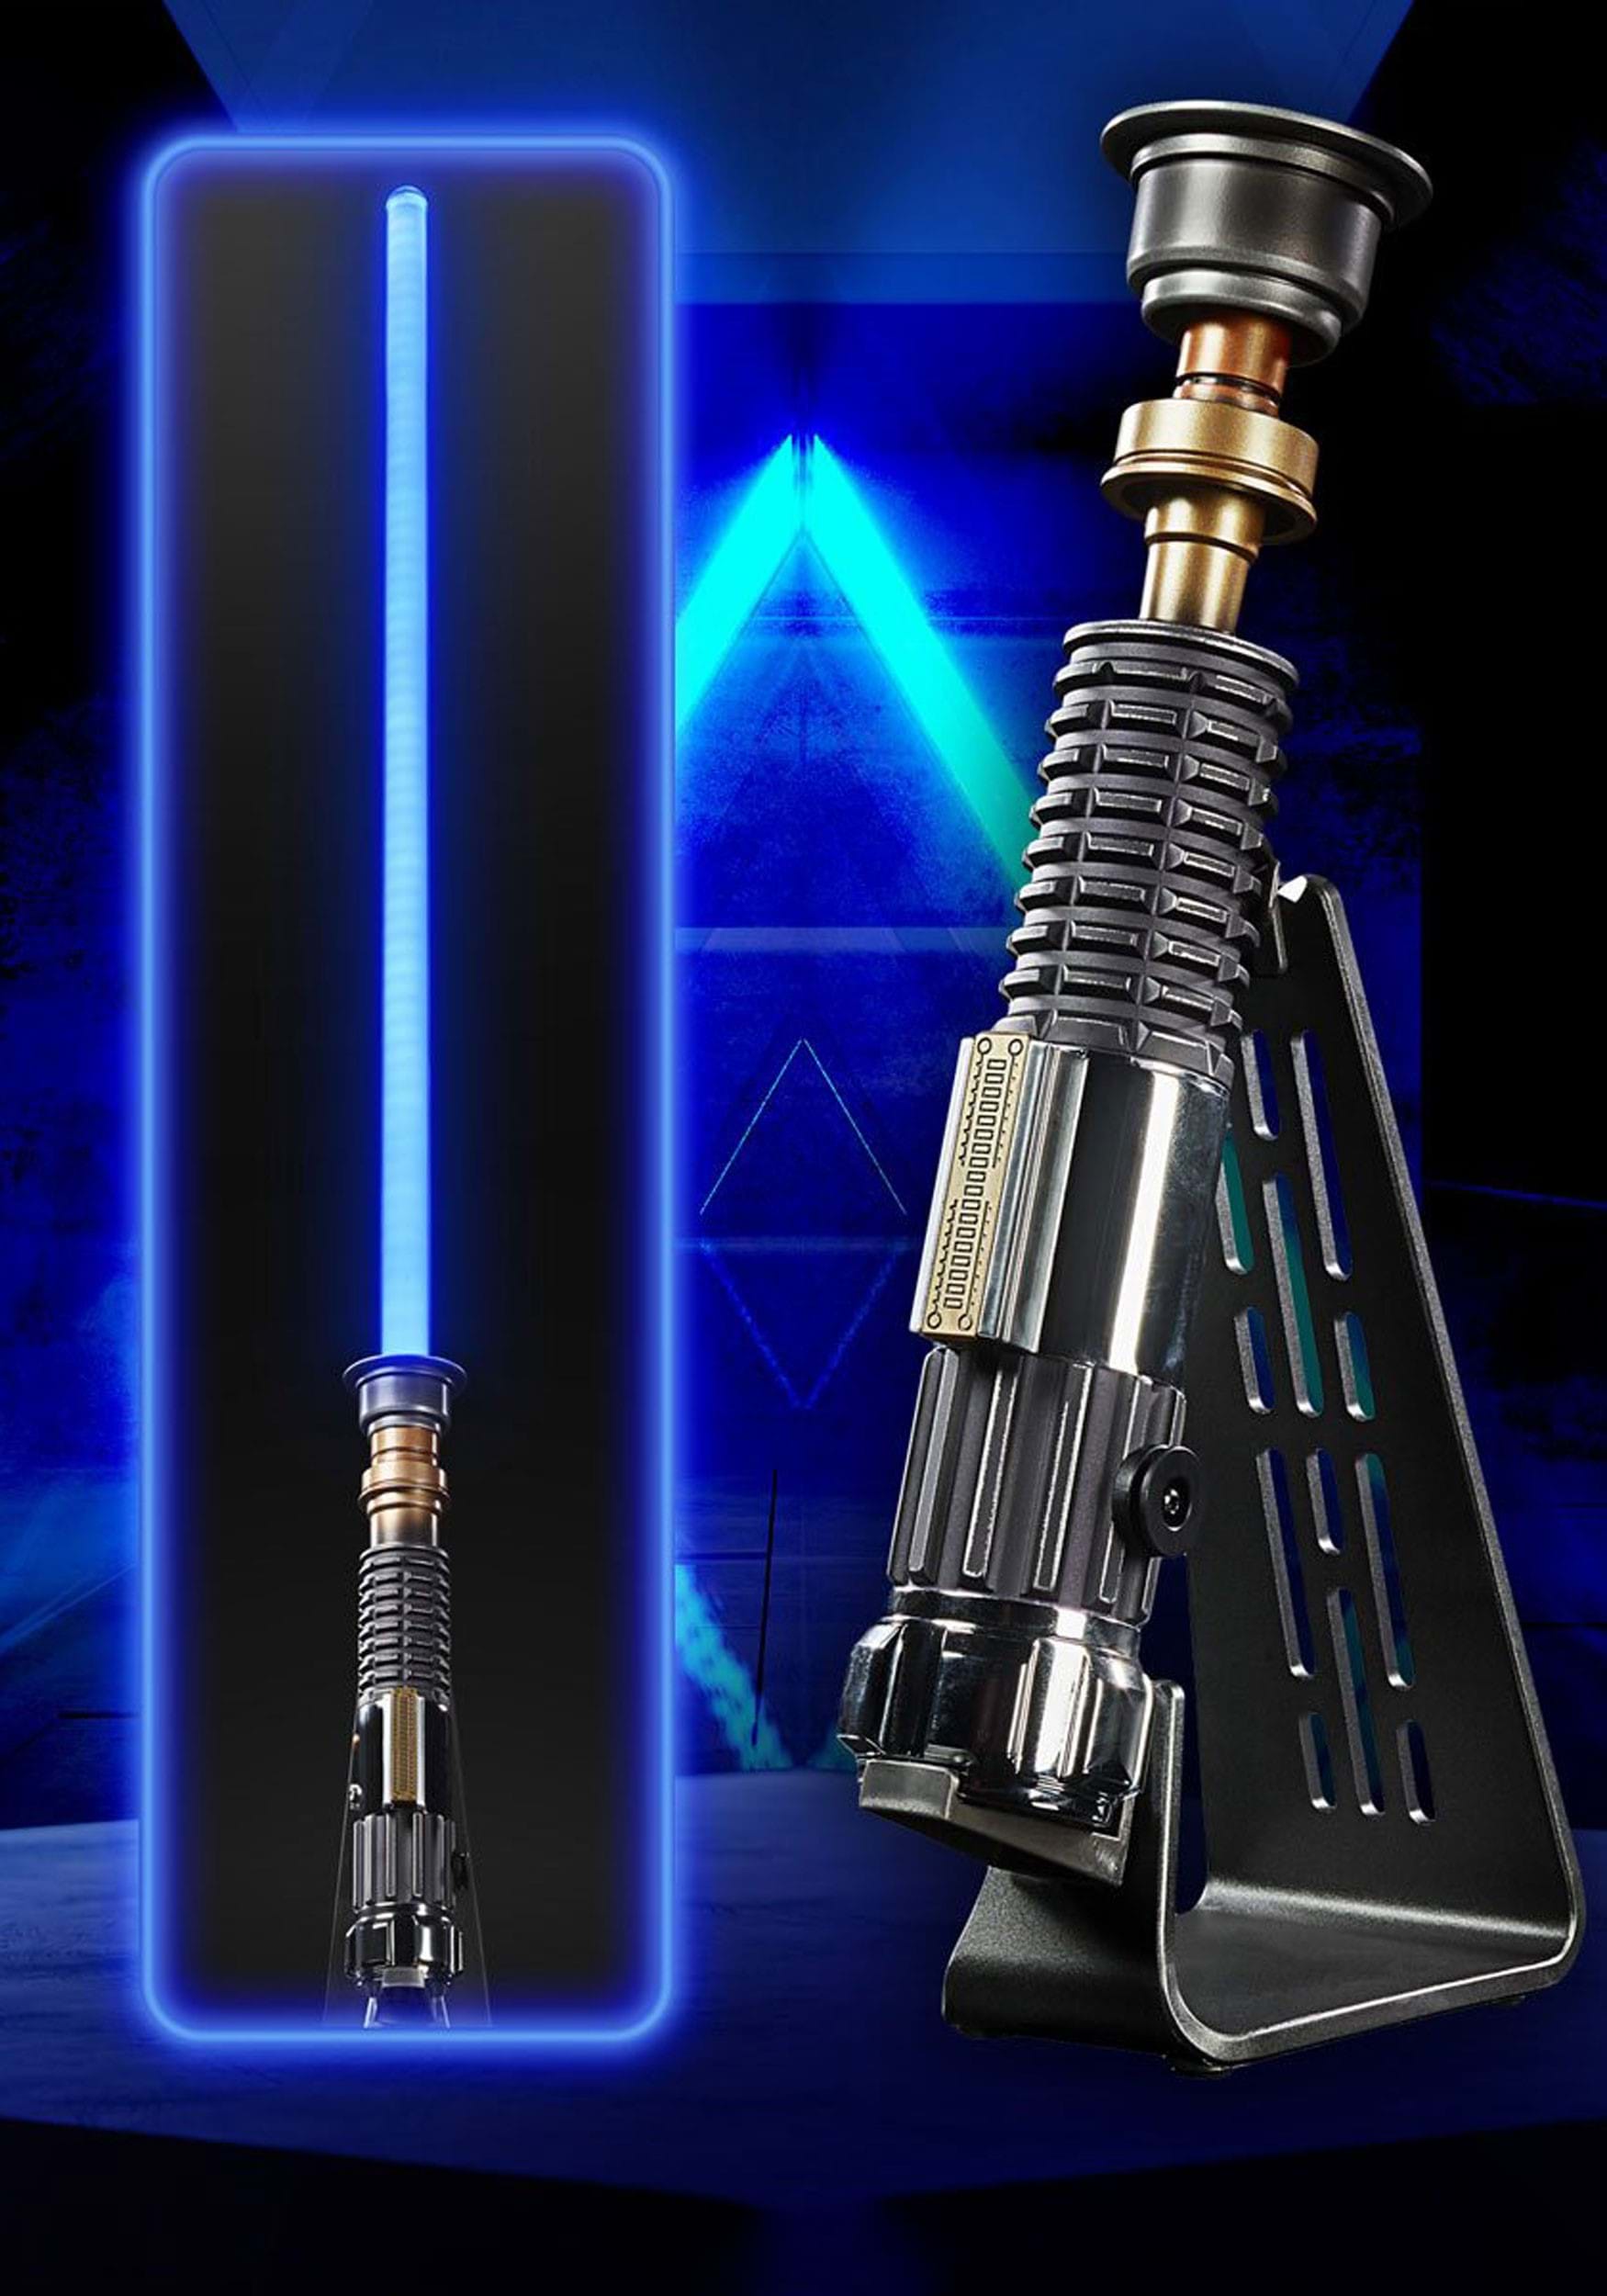 Dark King - Lord of the Rings – Blue Force Sabers EFX